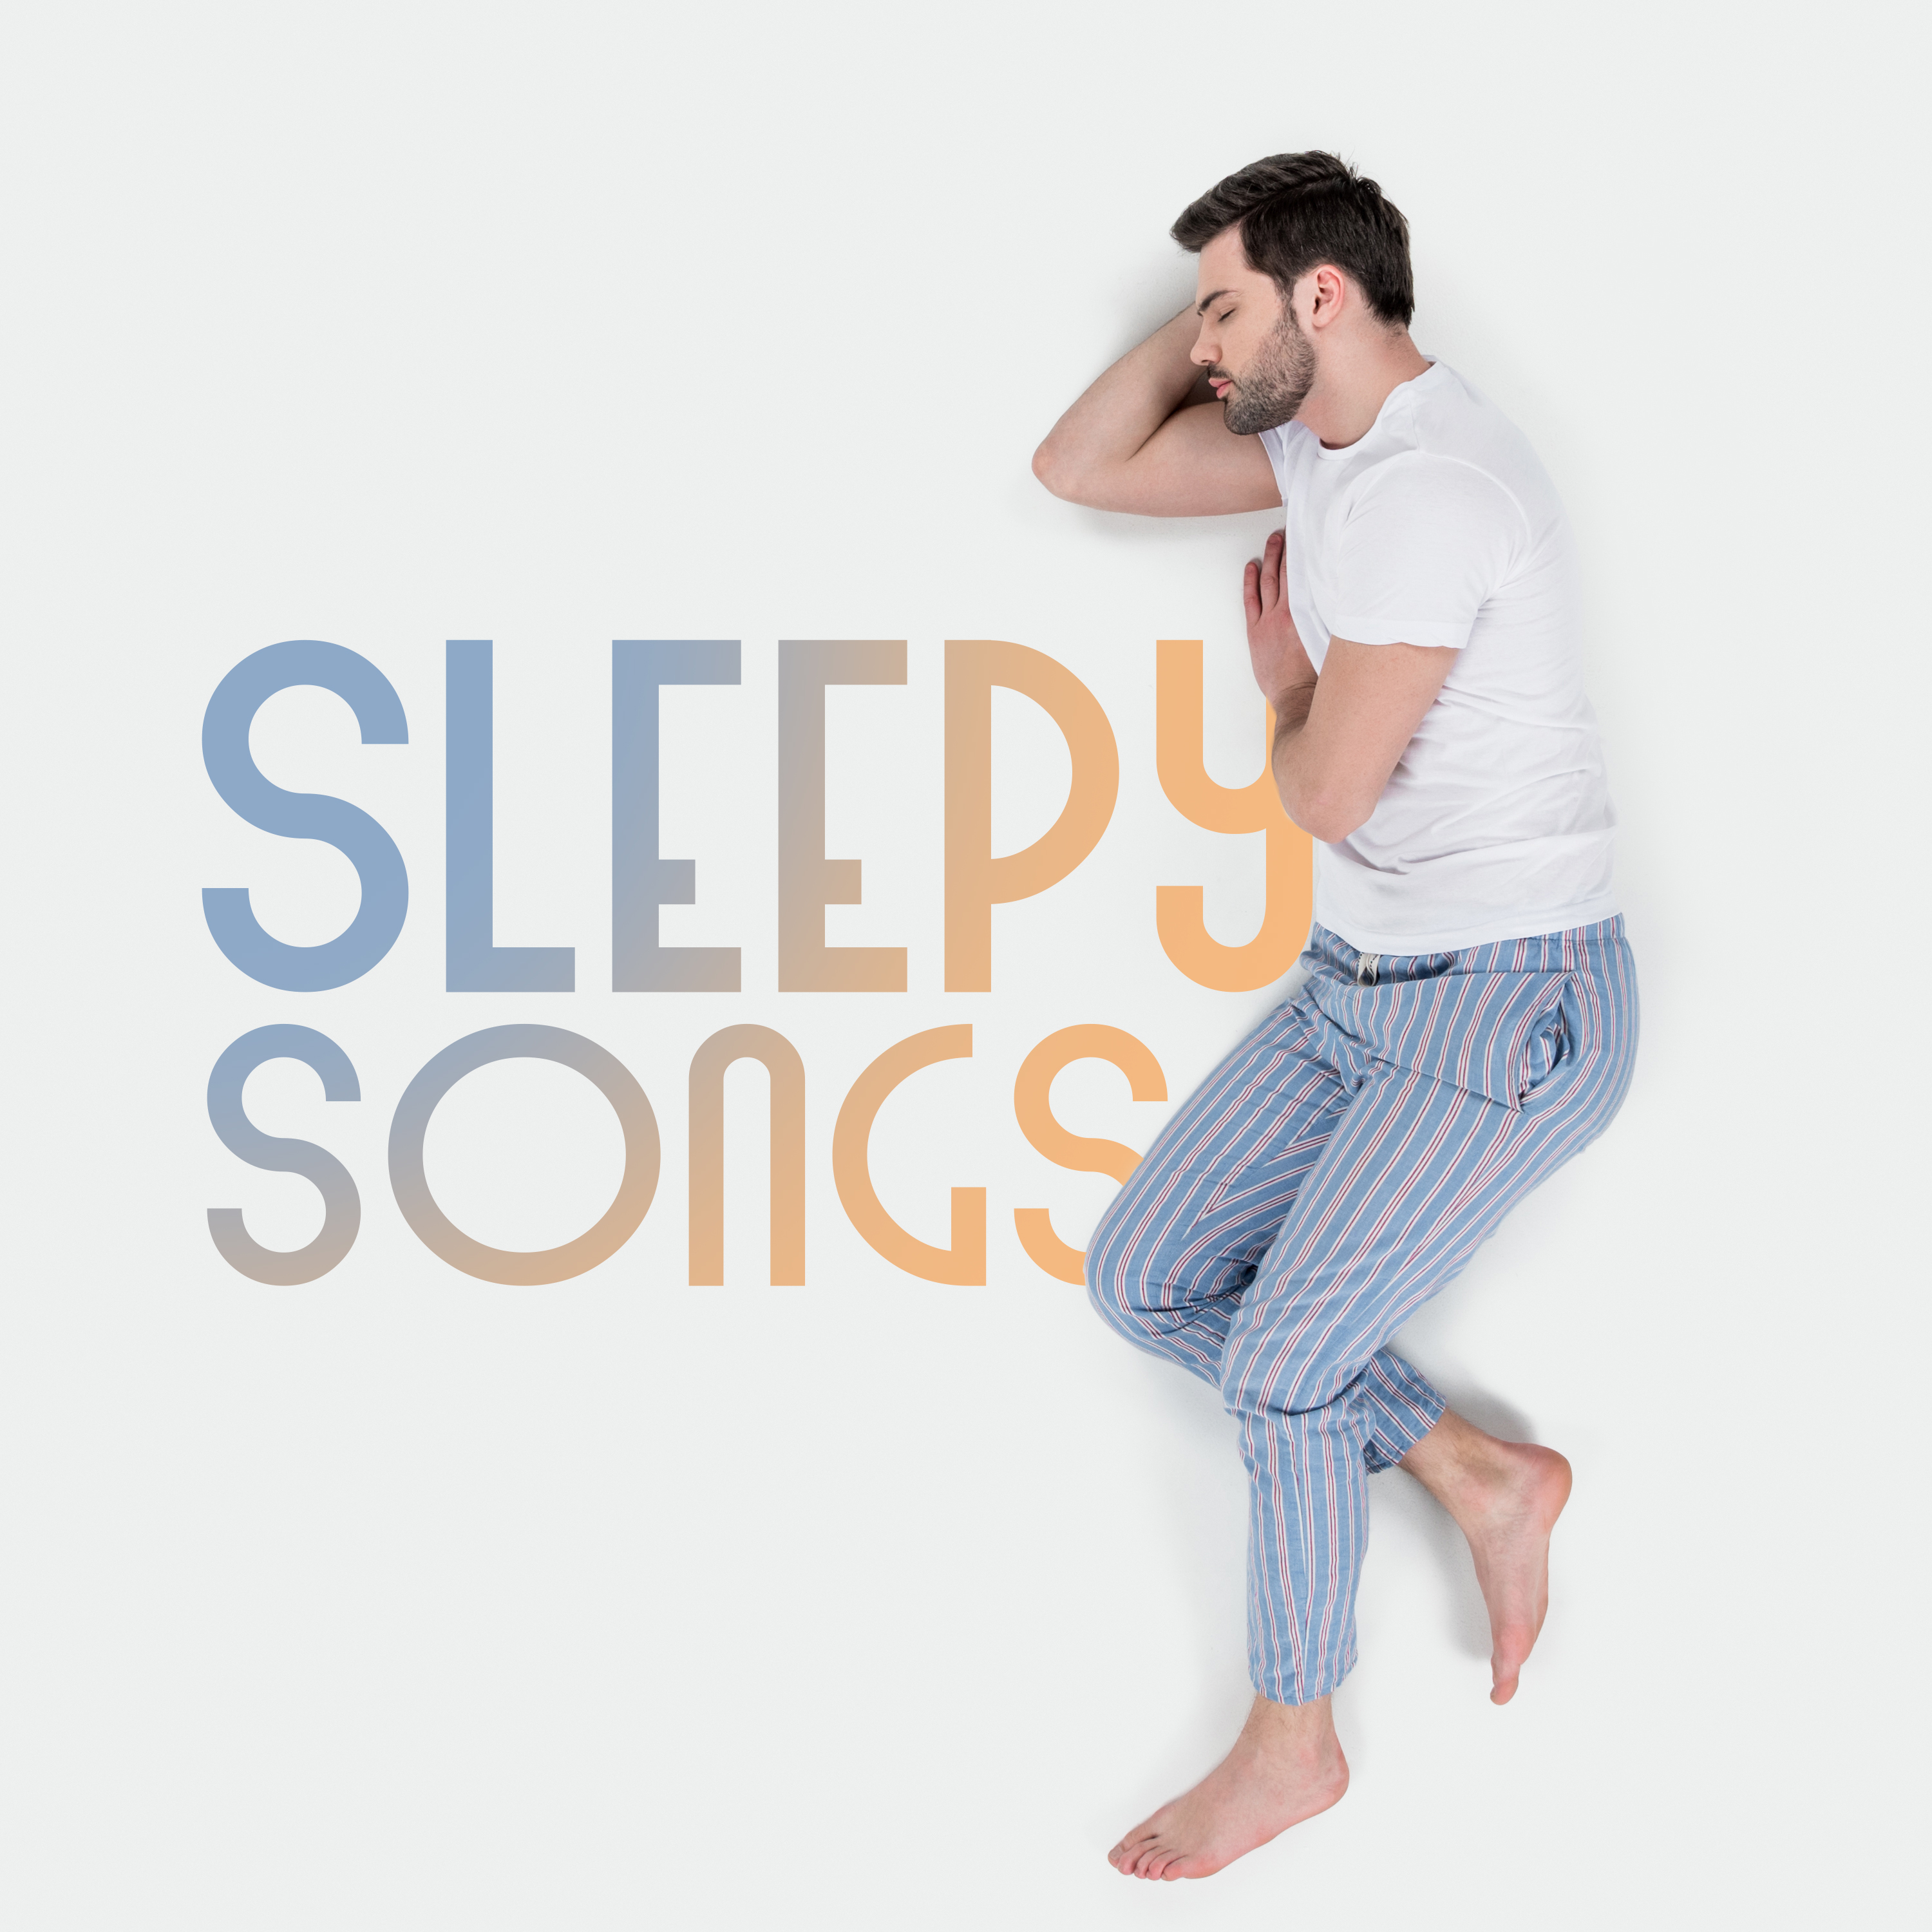 Sleepy Songs (Lullabies for Adult, Wonderful Piano Music with Nature Sounds, Calming & Relaxing Bedtime Music, Deep Sleep Every Night)